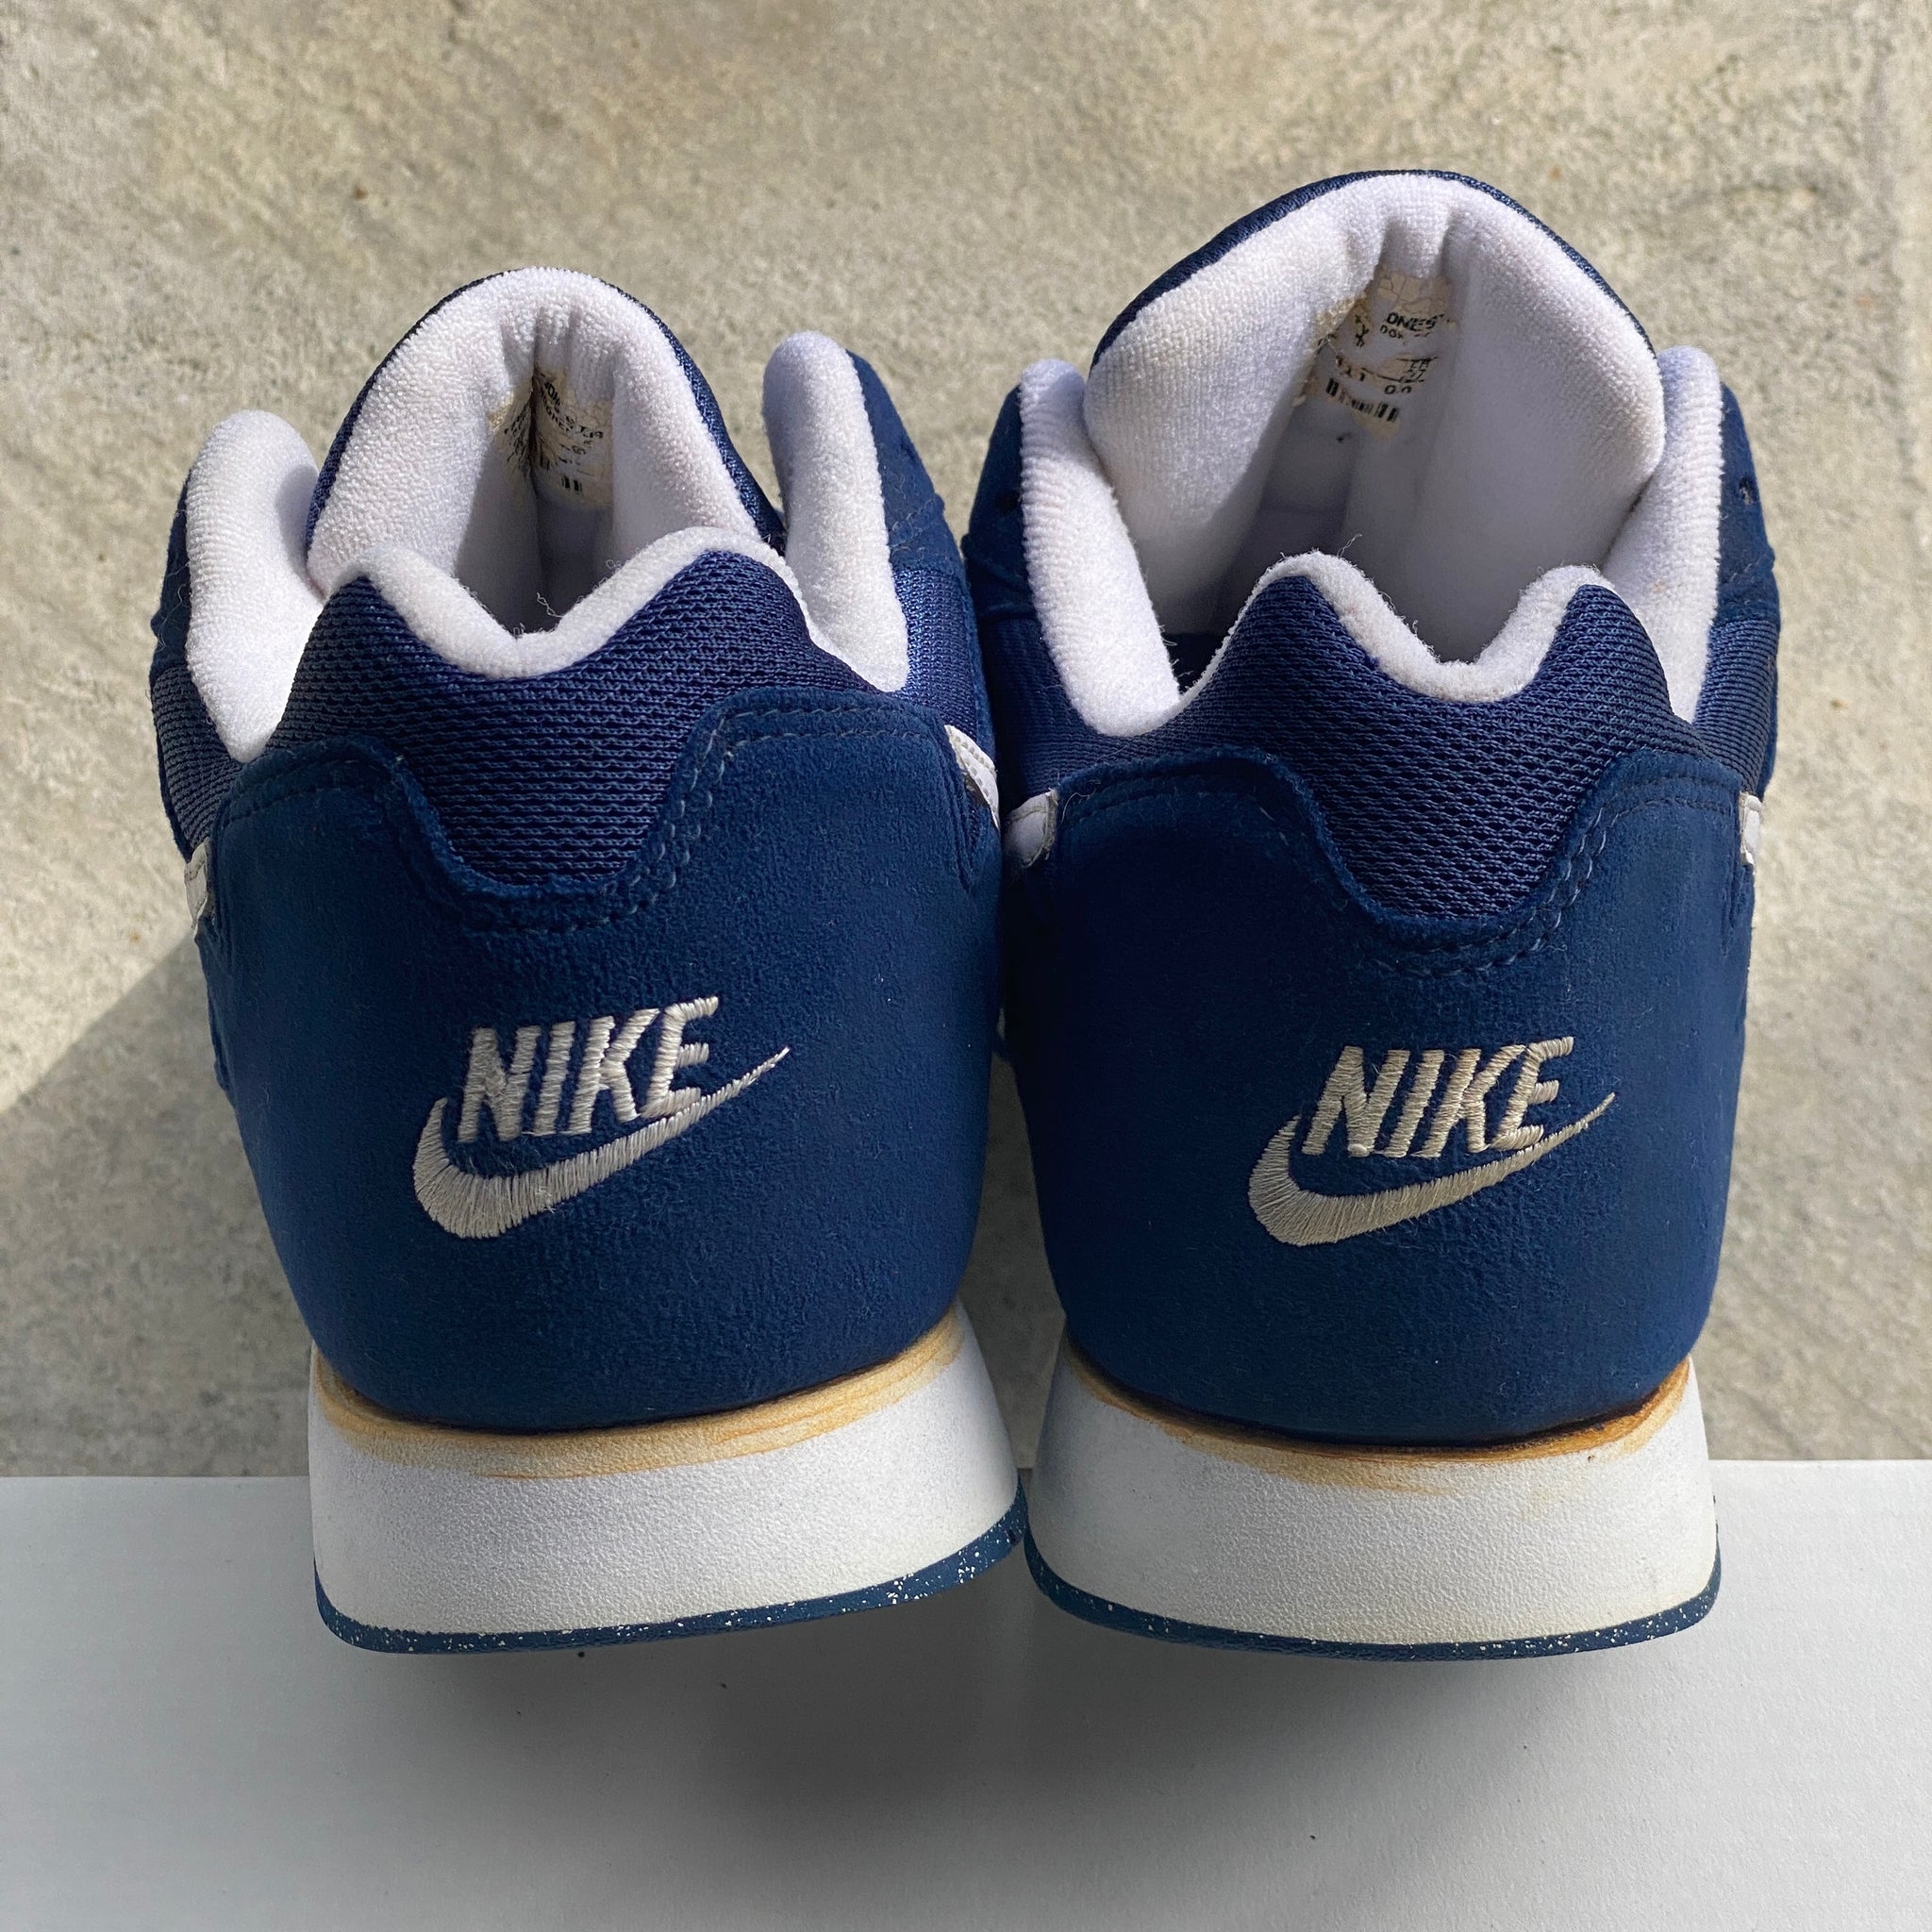 9 US - DS NIKE DECADES NAVY BLUE 1995